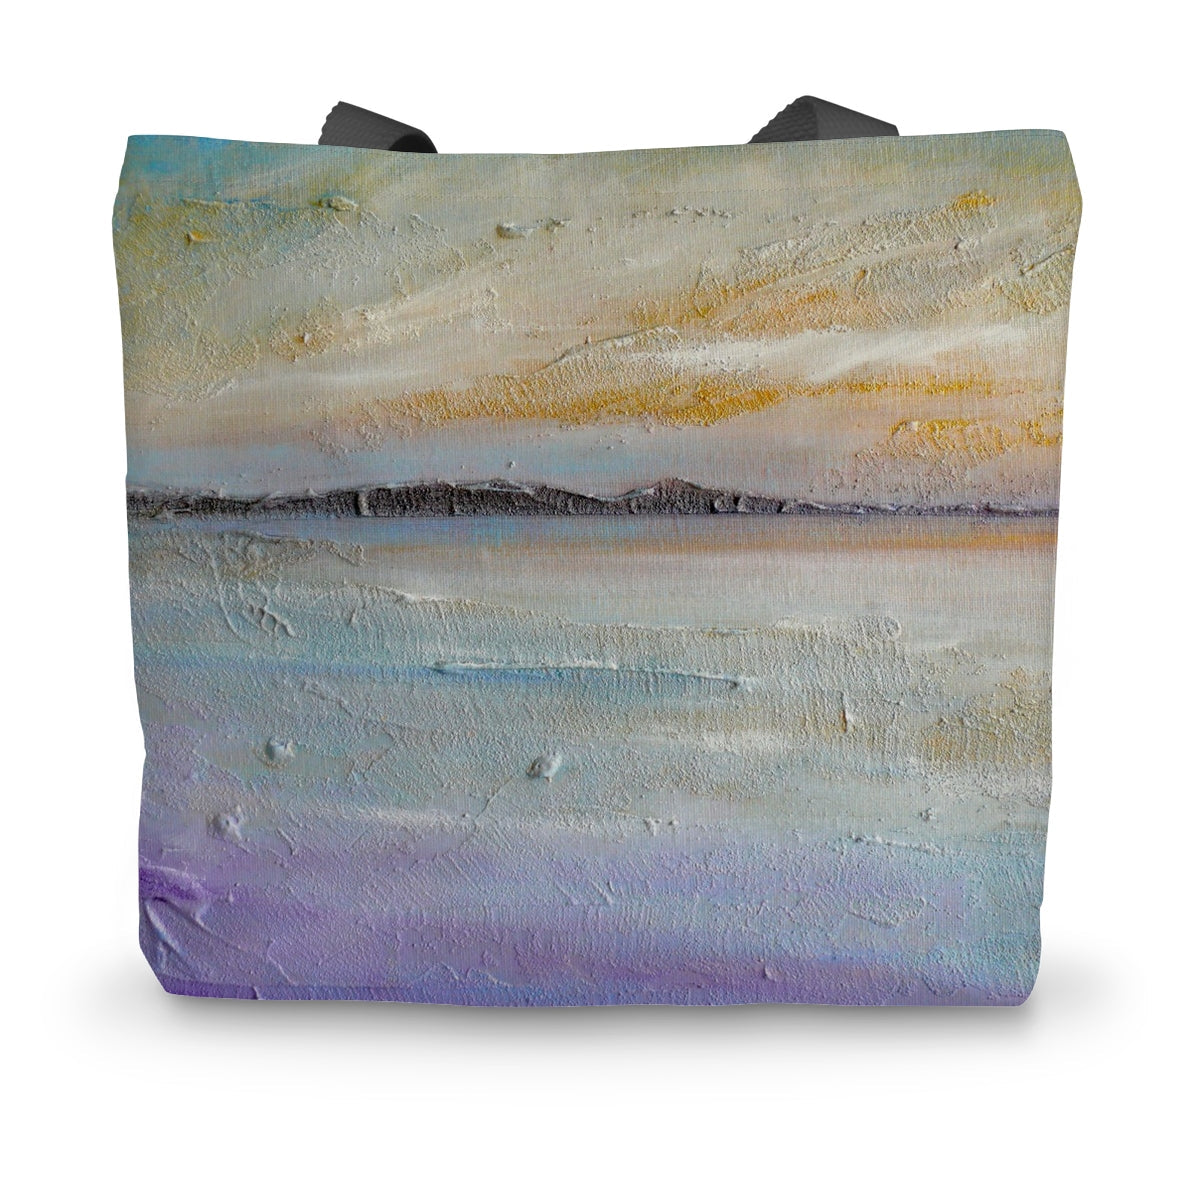 Sollas Beach North Uist Art Gifts Canvas Tote Bag-Bags-Hebridean Islands Art Gallery-14"x18.5"-Paintings, Prints, Homeware, Art Gifts From Scotland By Scottish Artist Kevin Hunter